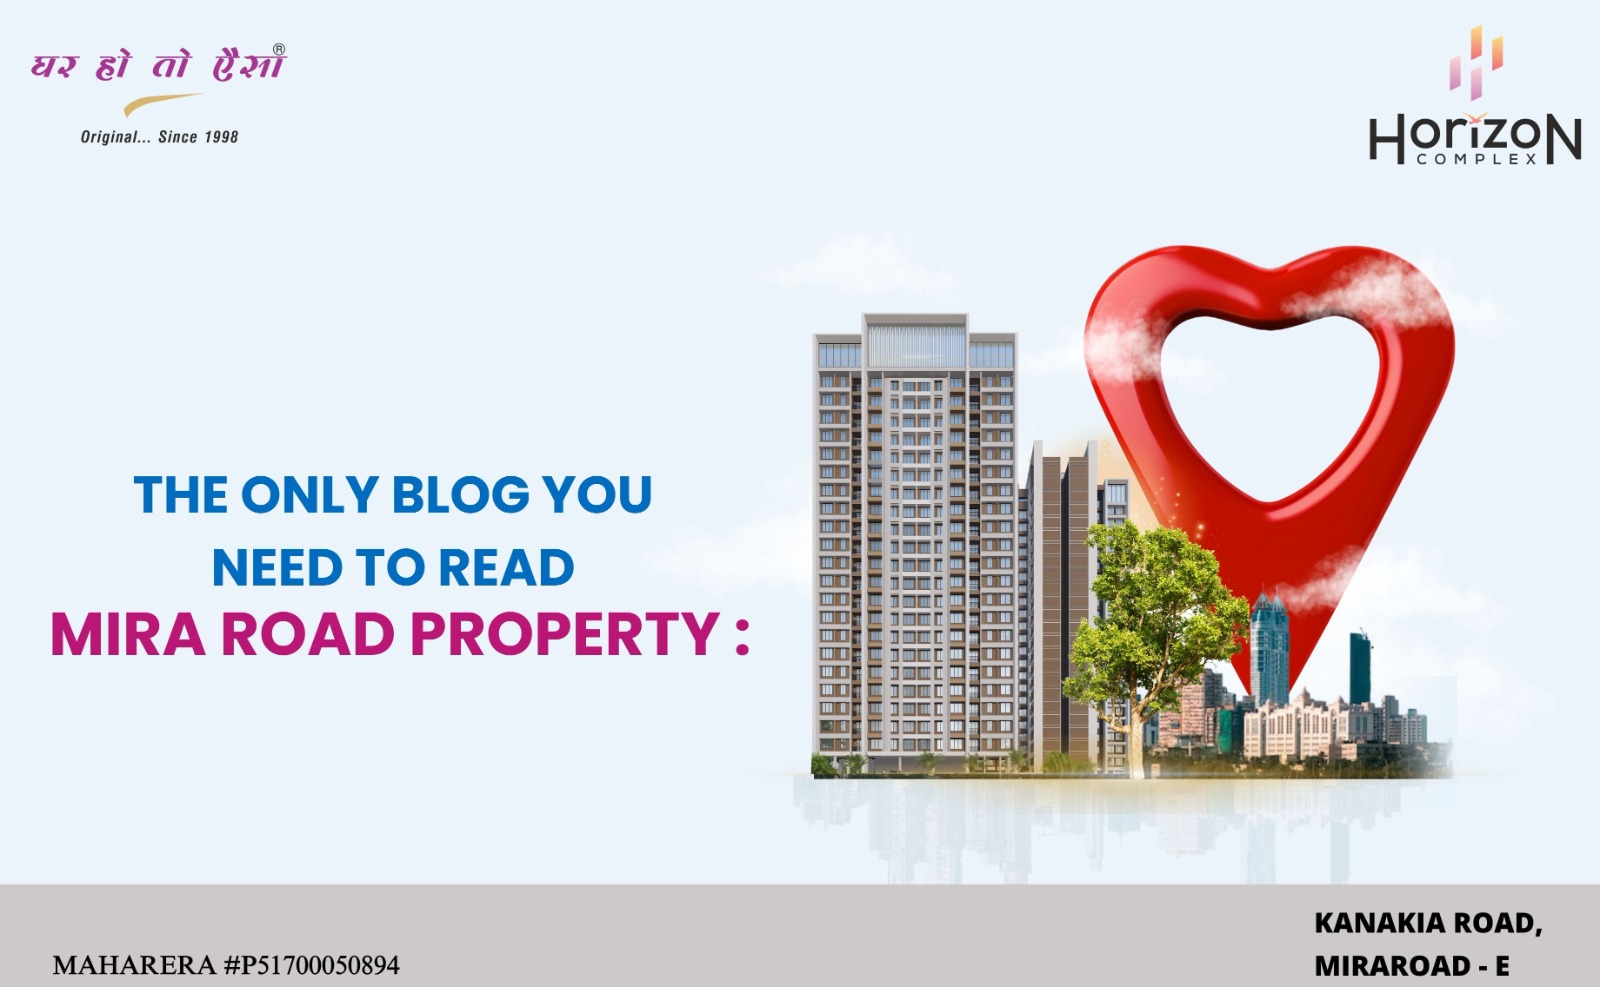 Mira Road Property: The Only Blog You Need To Read